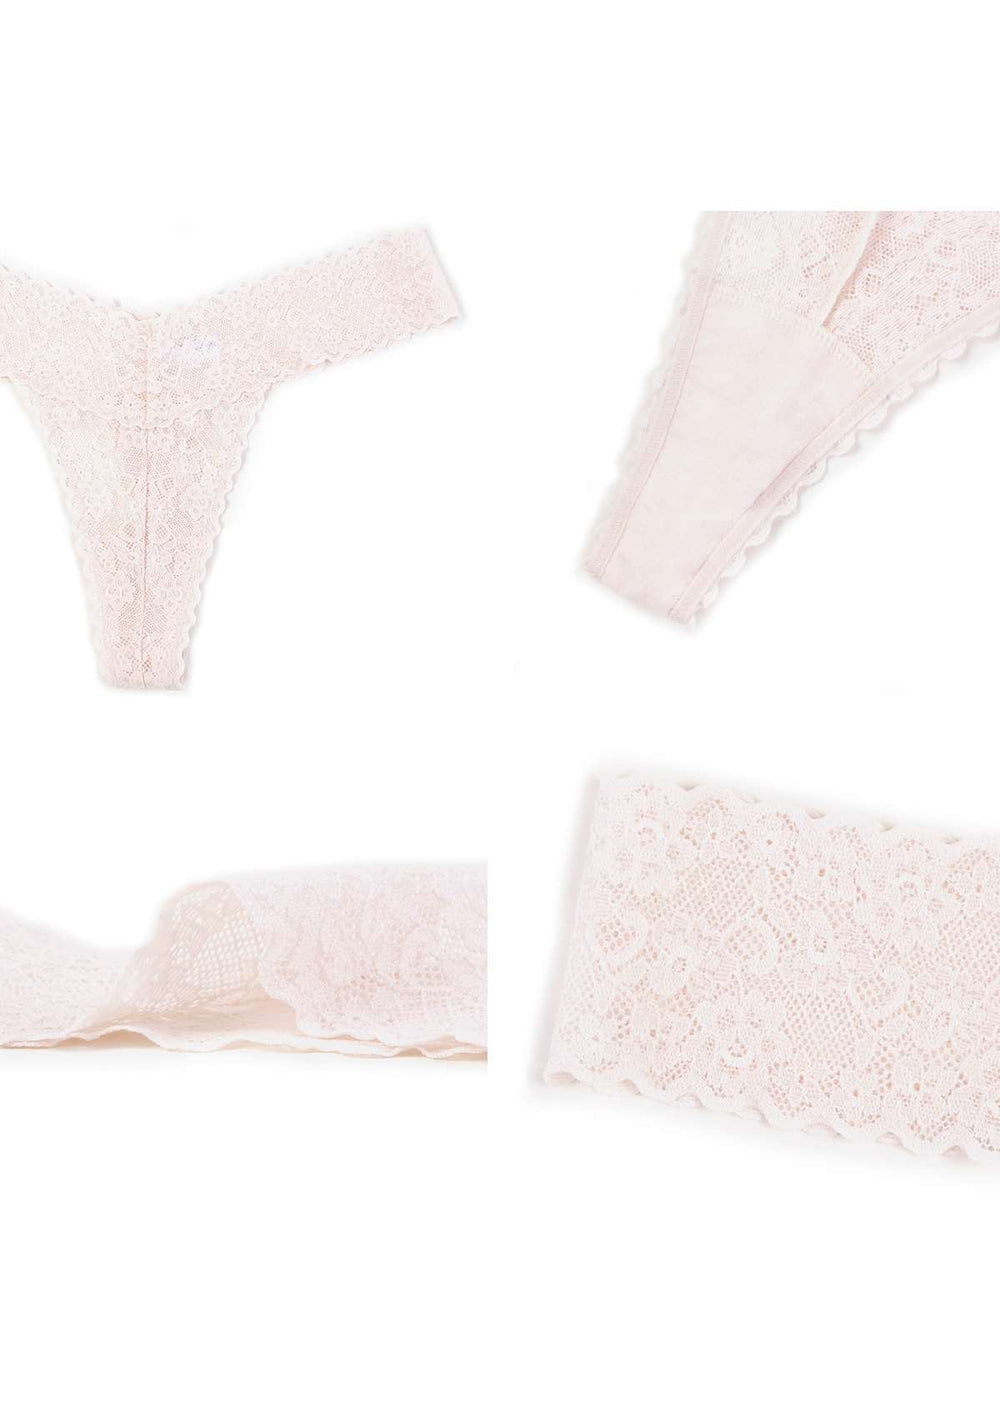 Take Talk Cheeky Underwear for Women Sexy Lace Panties Soft